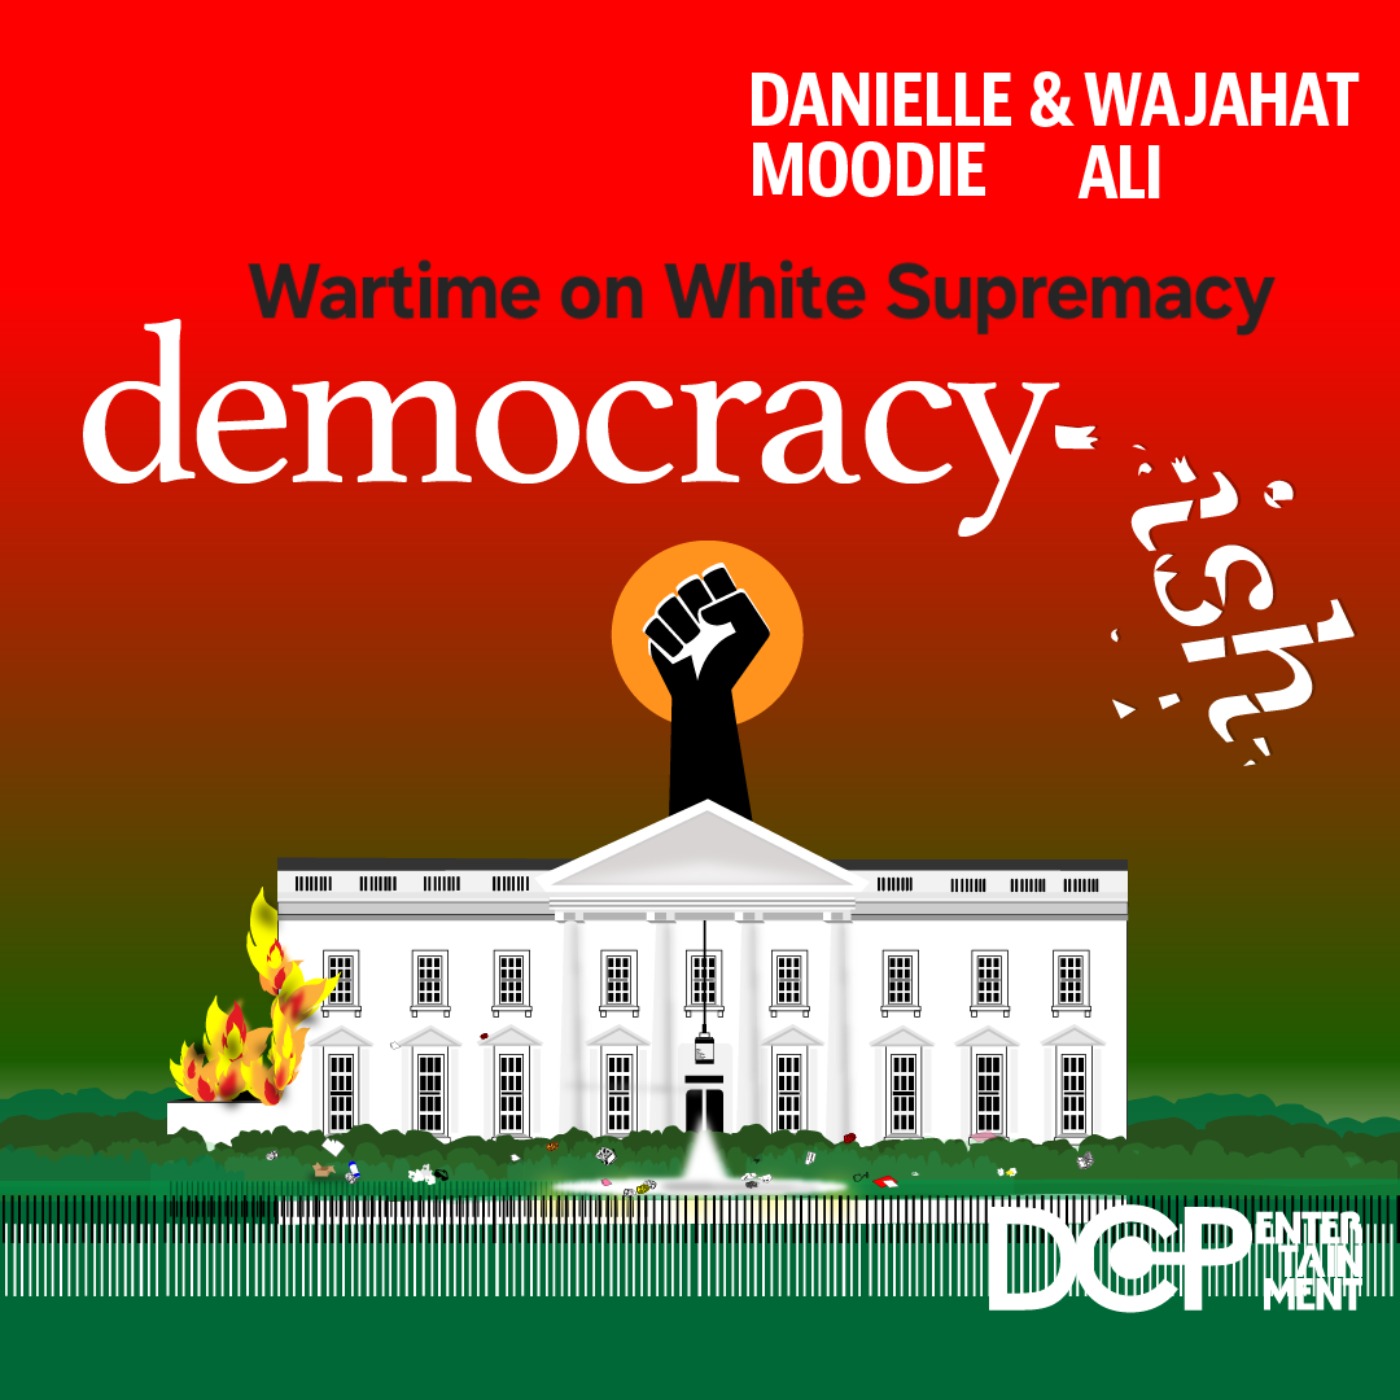 Wartime on White Supremacy